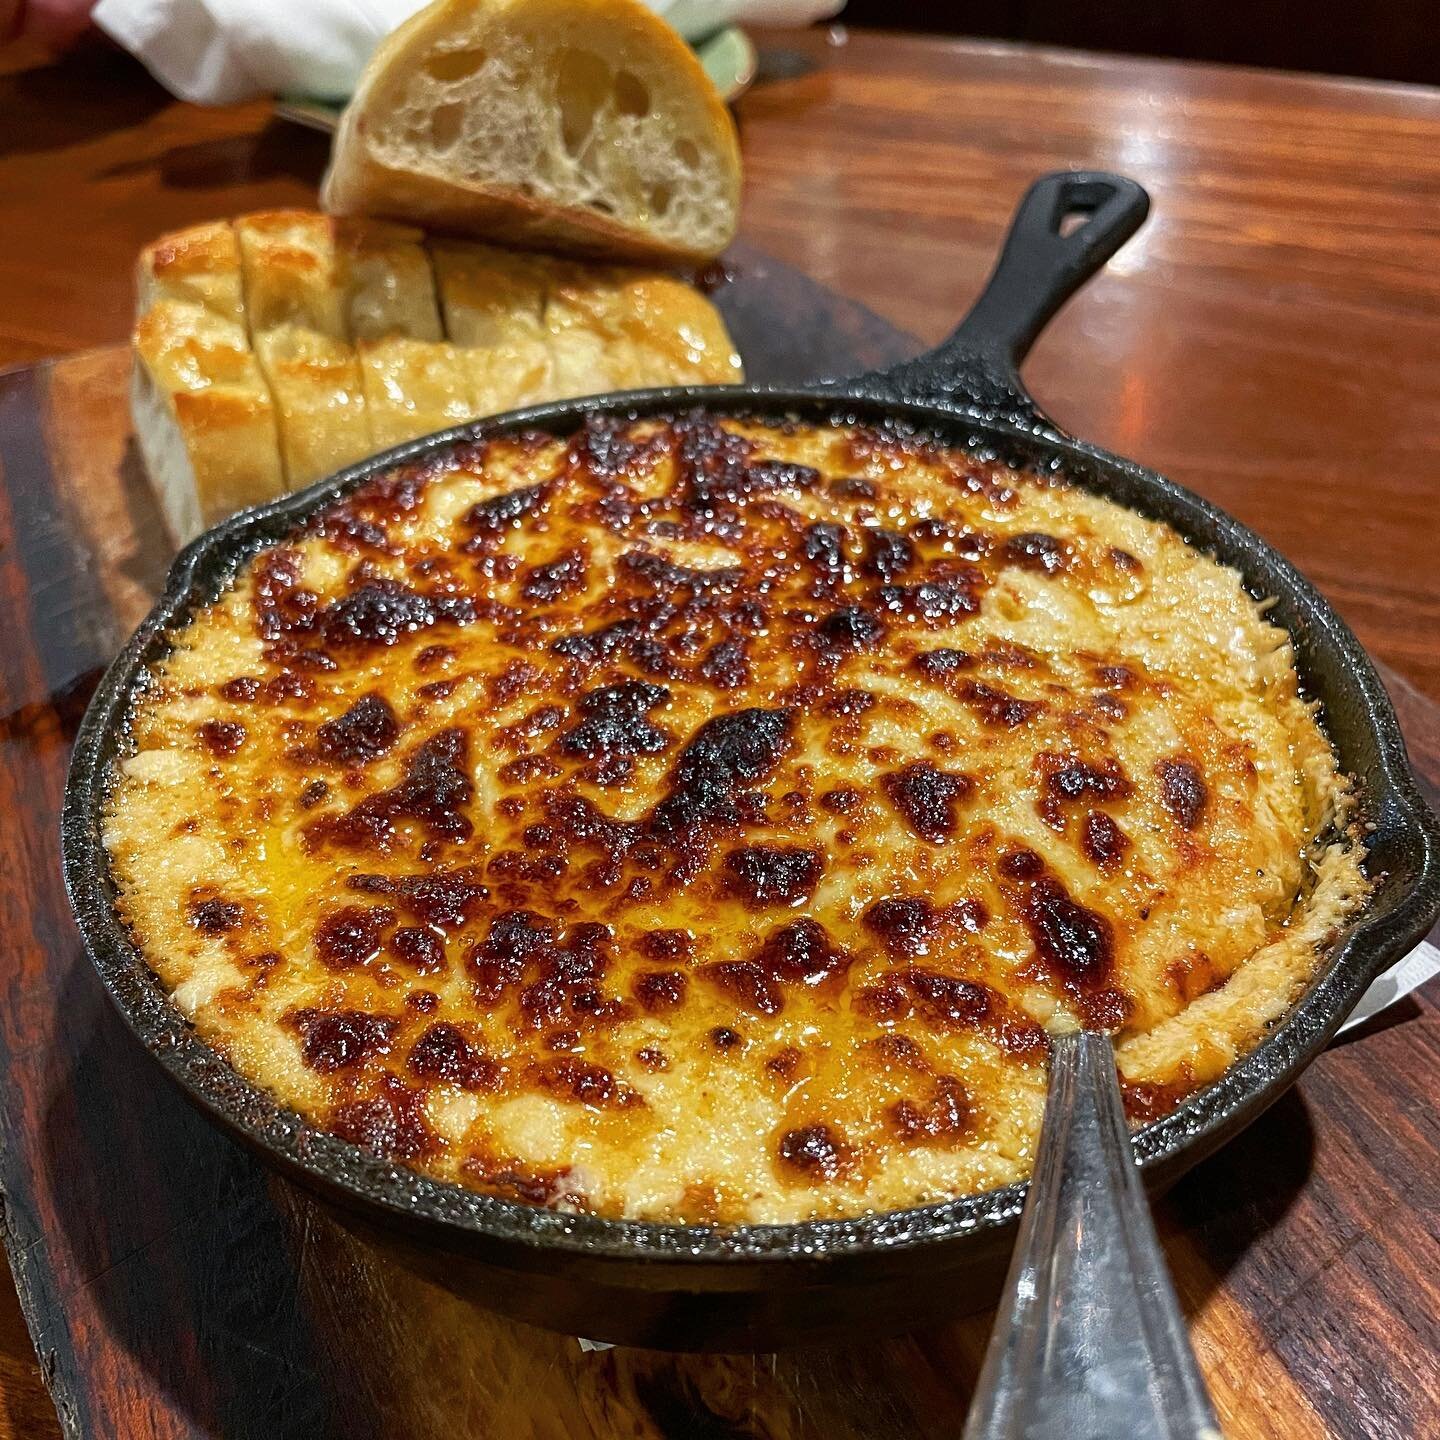 Greetings from your friendly, Maryland-born food writer, who really loves the crab dip at @phillipsseafood.